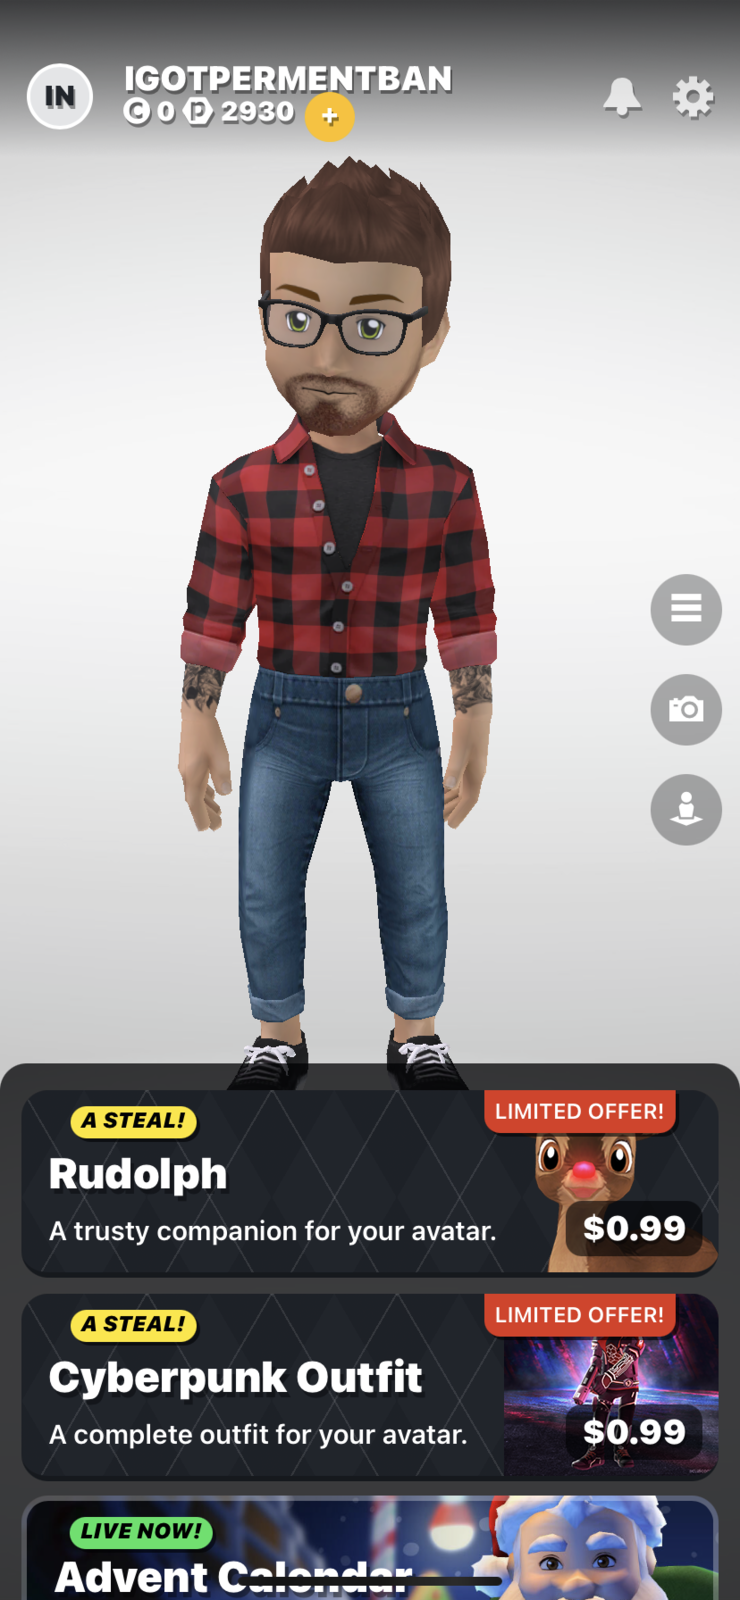 Club Cooee - Cooee Cash Free  - Android & iOS MODs, Mobile  Games & Apps